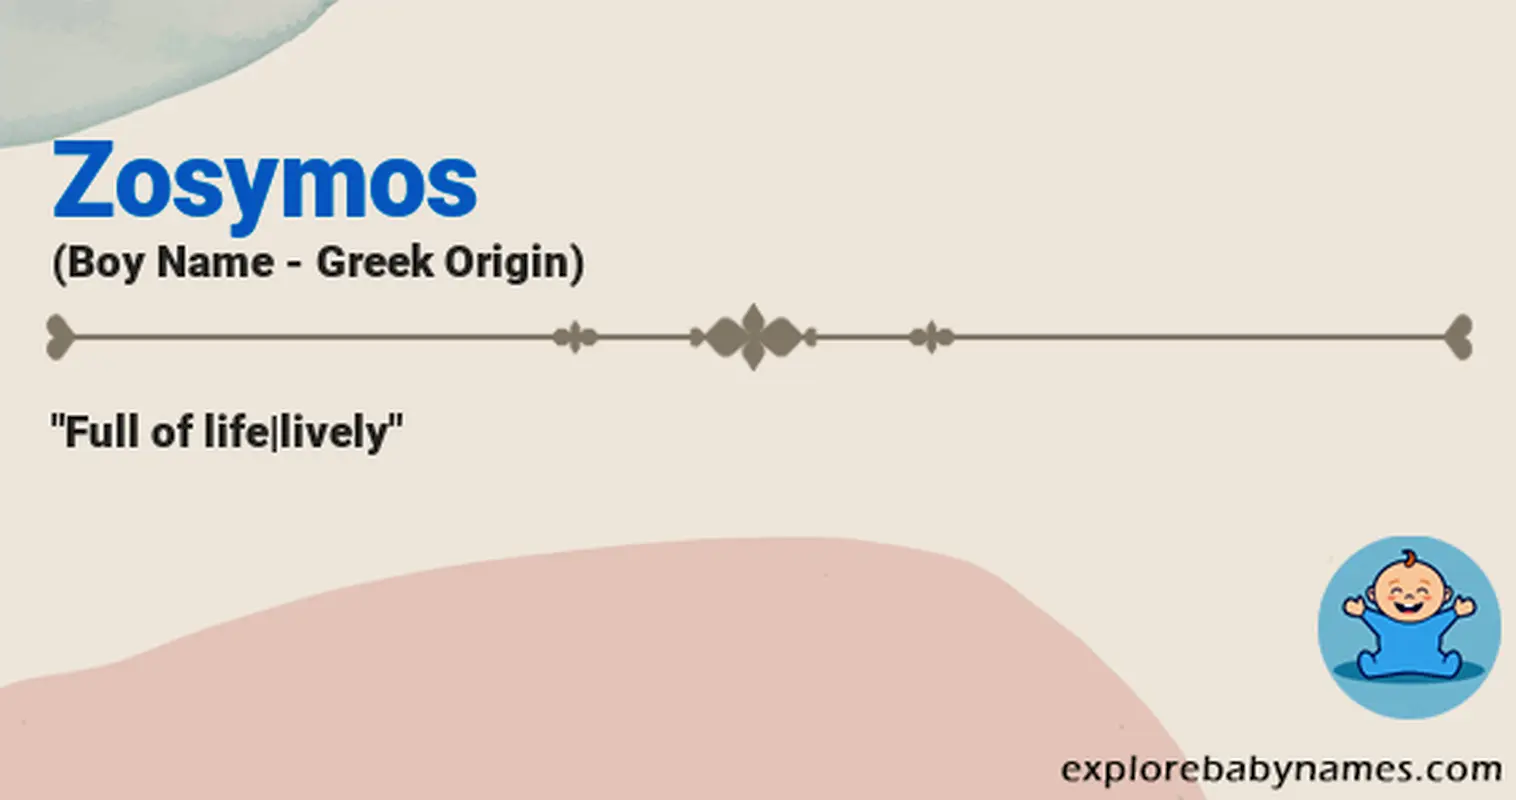 Meaning of Zosymos